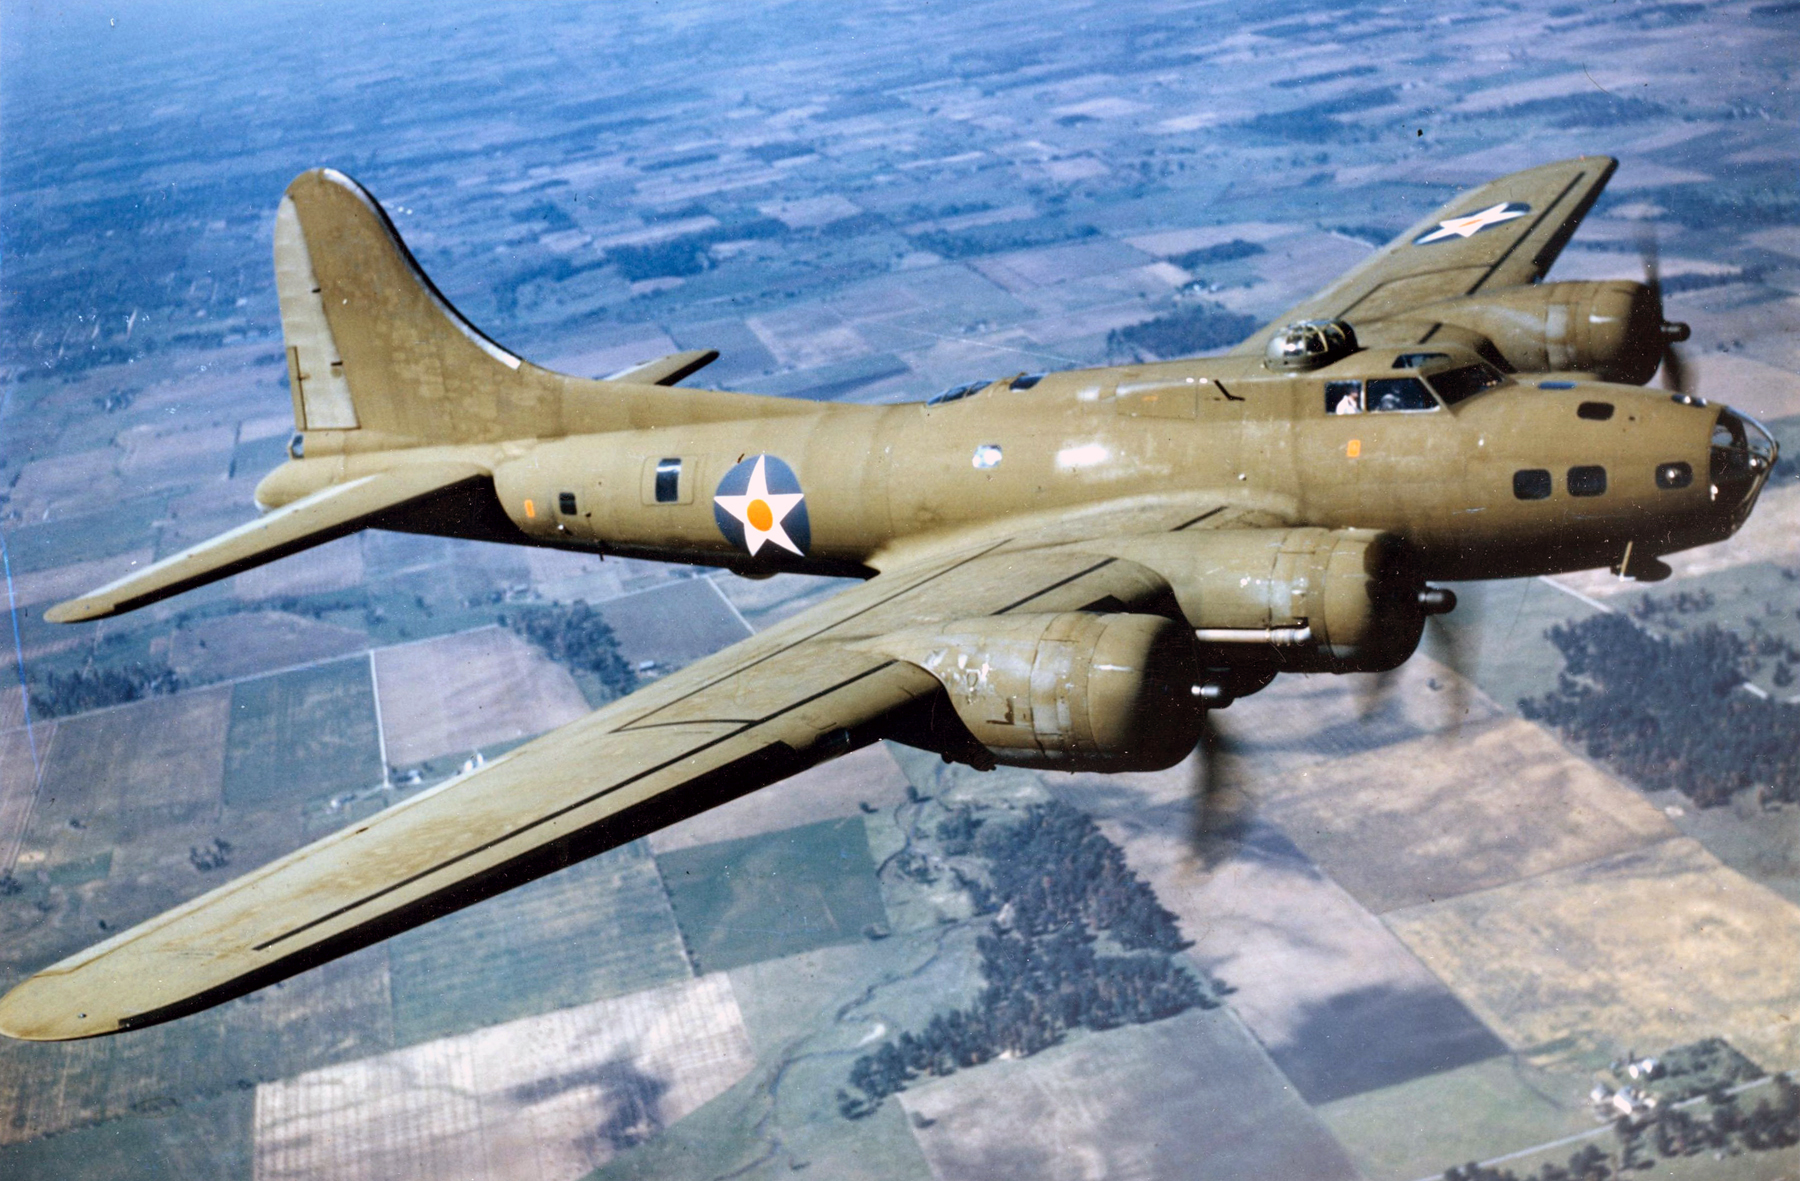 Boeing B-17 Flying Fortress #01